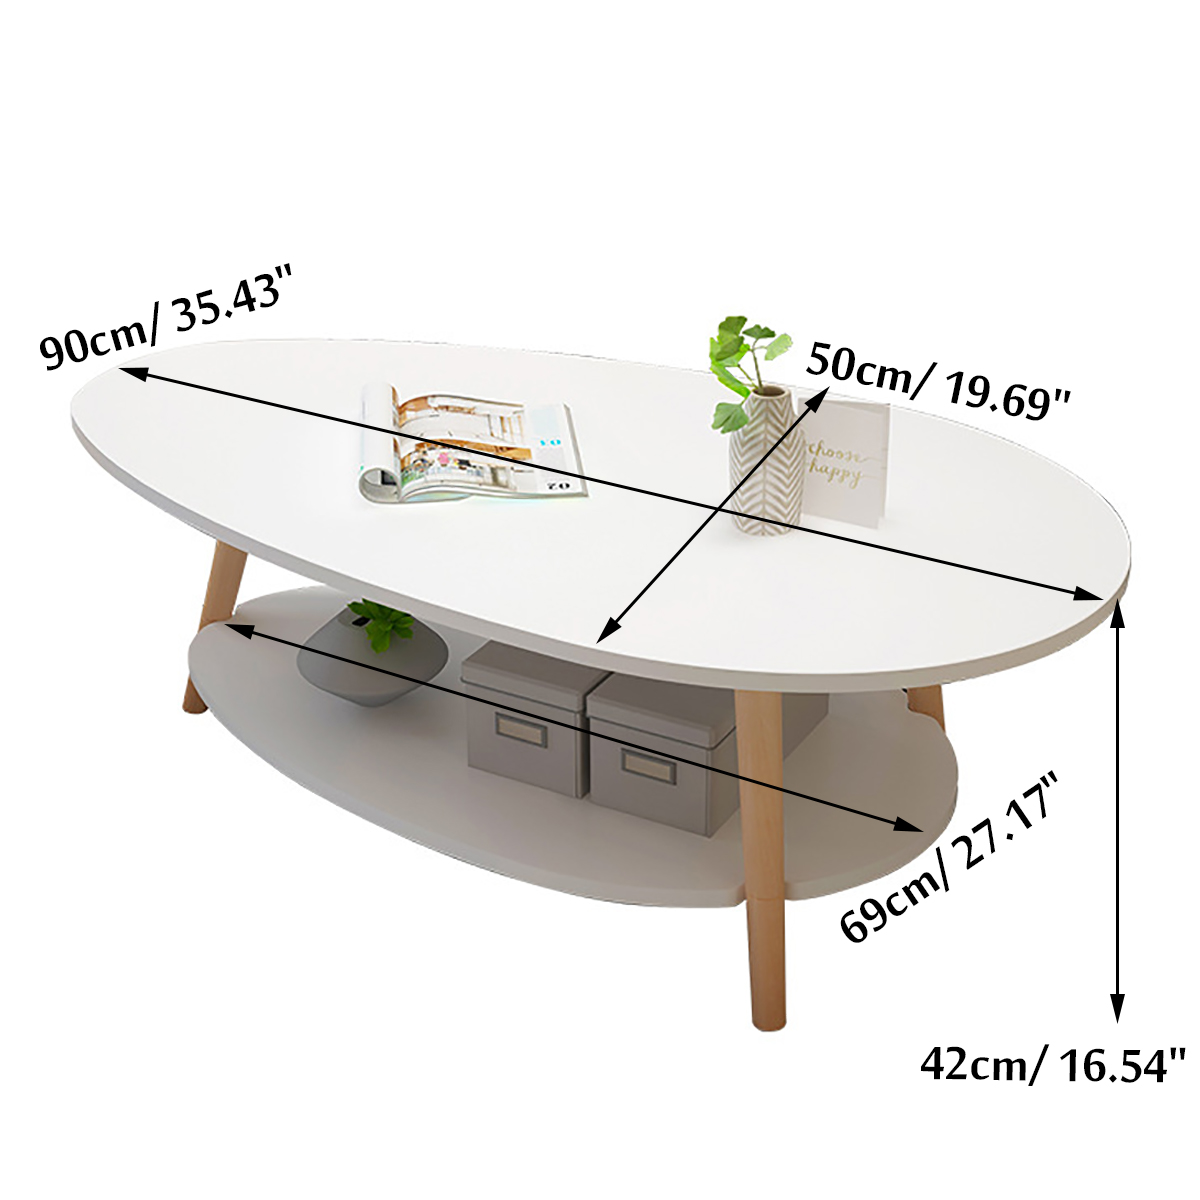 Double-Layers-Coffee-Table-Modern-Laptop-Desk-Living-Room-Round-Table-Writing-Study-Table-Storage-Ra-1752142-3